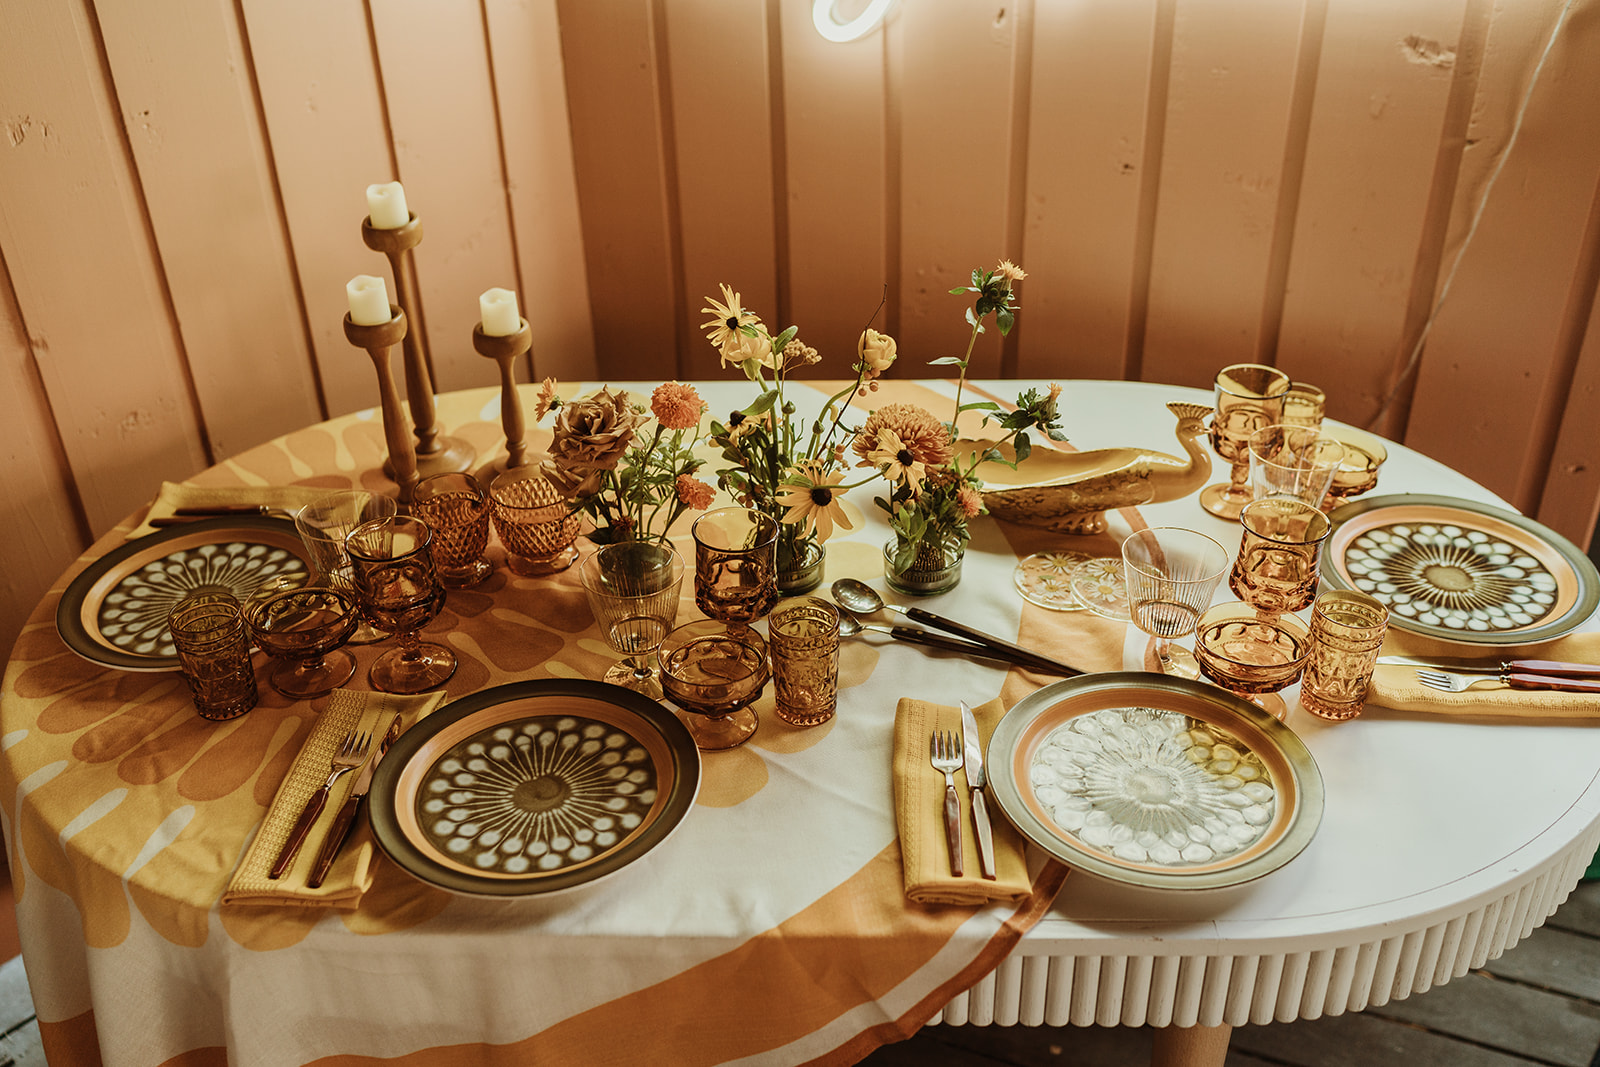 70's inspired retro tablescape with vintage accents